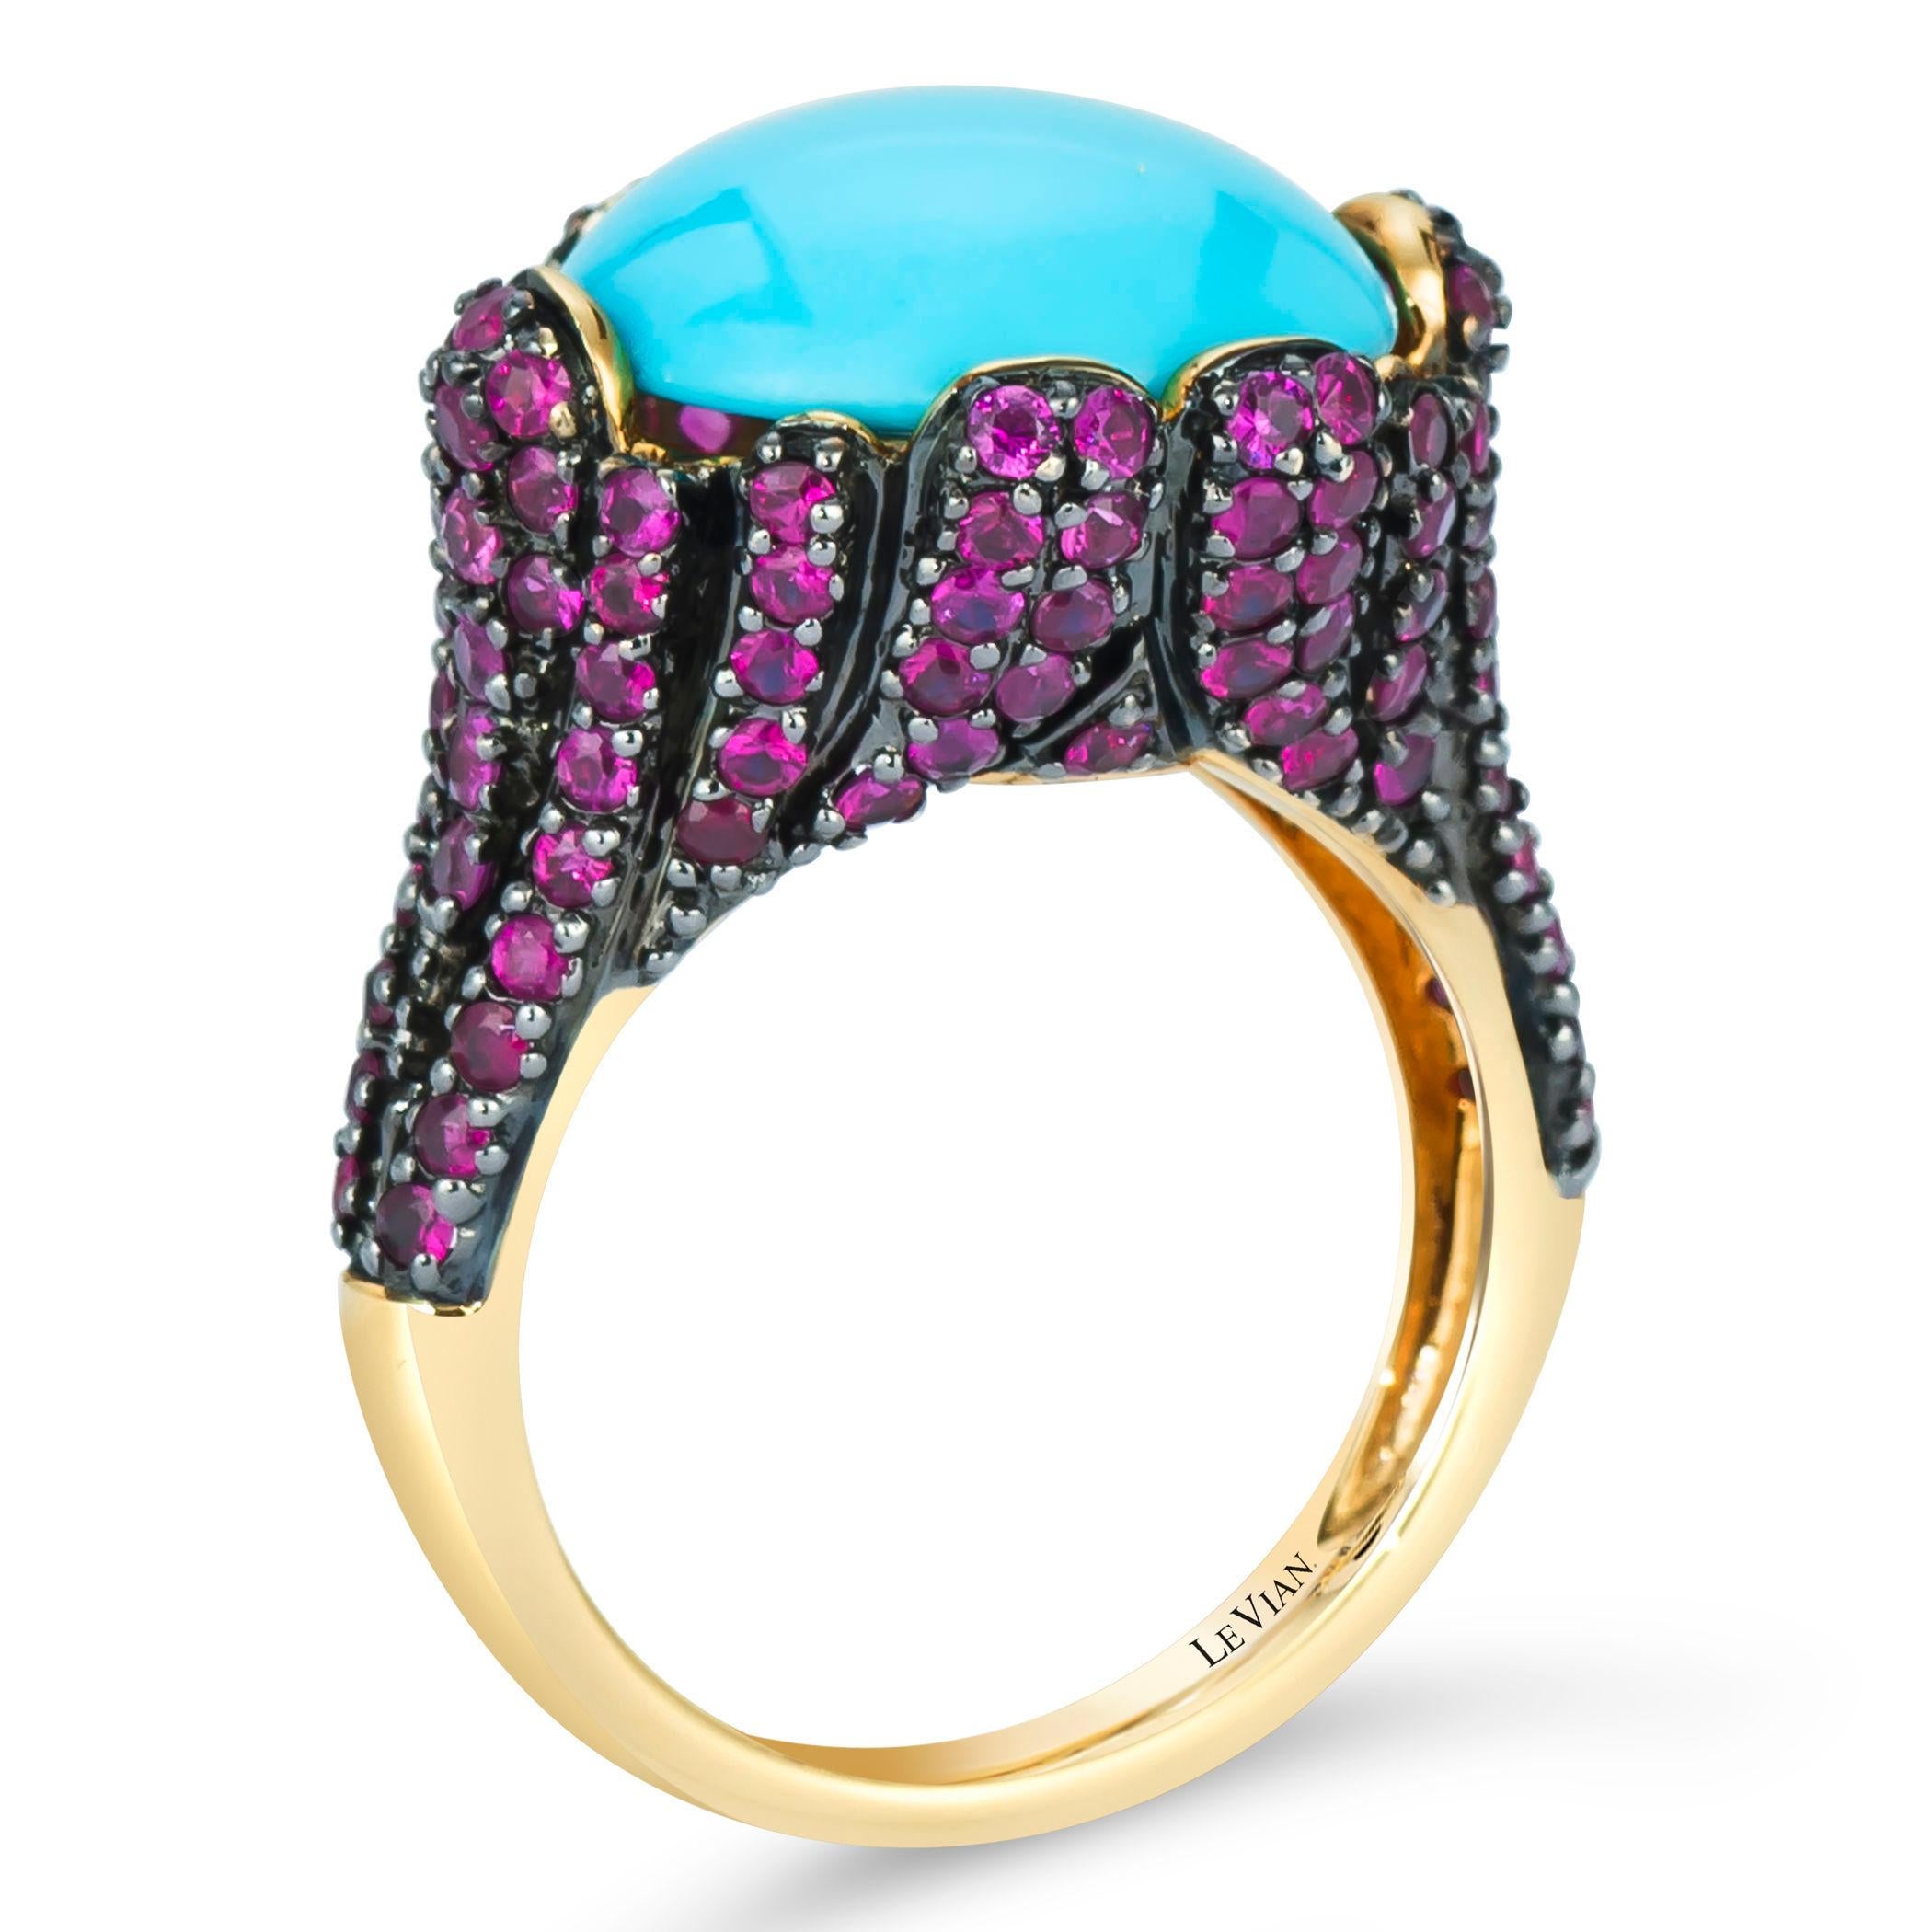 Women's or Men's Carlo Viani Turquoise Ring 7 7/8 Cts Gemstone Cocktail Ring